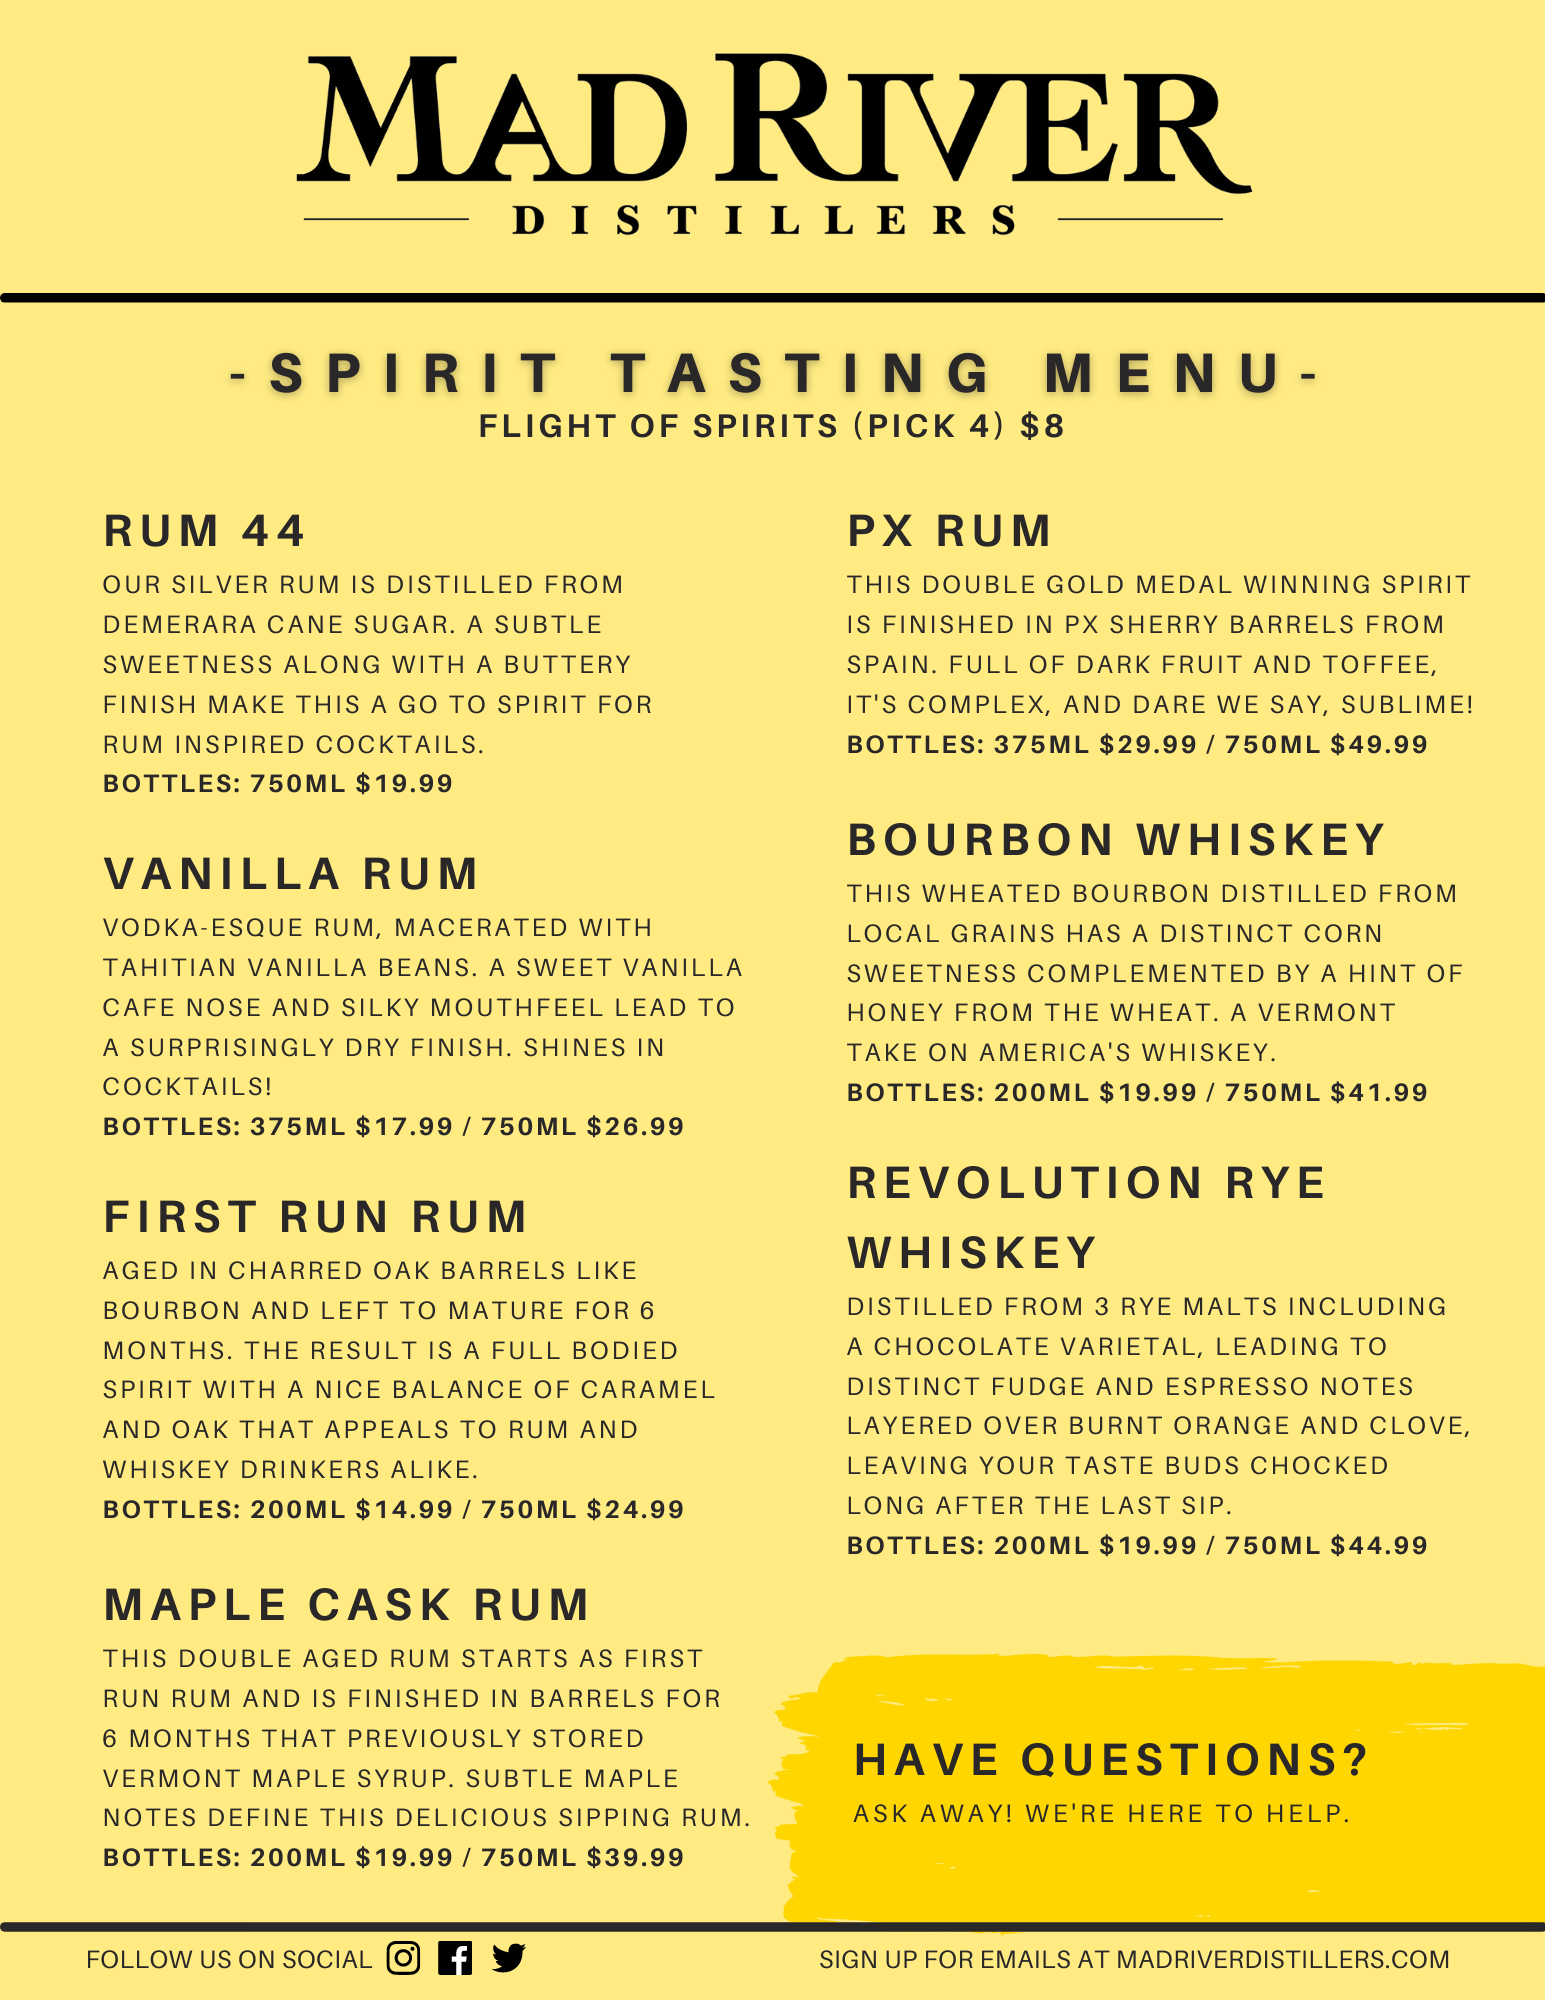 Spirit Tasting Menu: Rum 44, Vanilla Rum, First Run Rum, Maple Cask Rum, PX Rum, Bourbon Whiskey, Revolution Rye Whiskey. Flight of Spirits (pick 4) for $6. Ask about our limited releases.